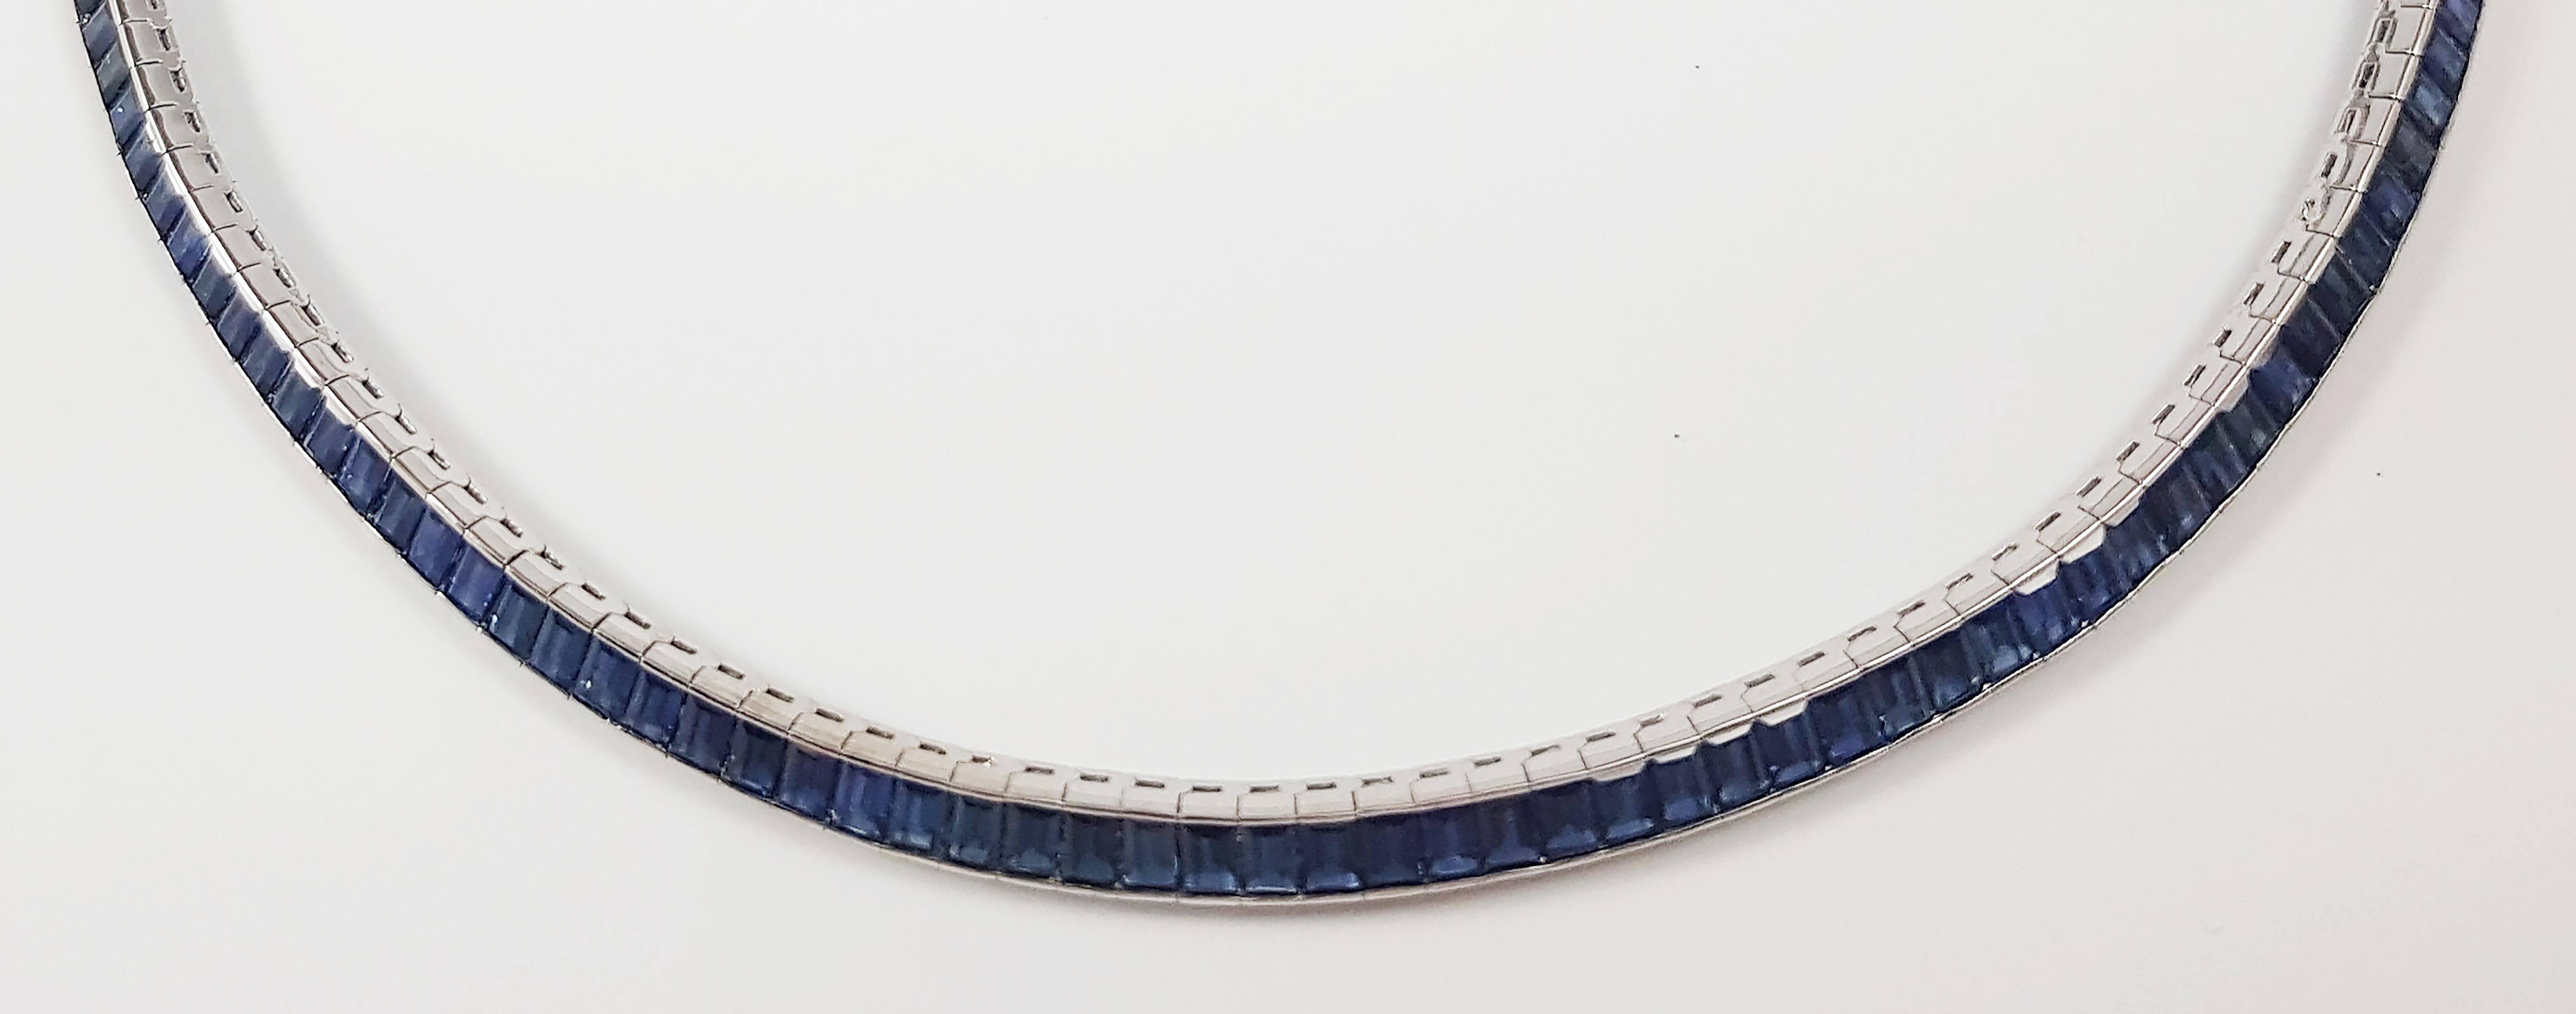 Blue Sapphire 34.90 carats Necklace set in 18 Karat White Gold Settings

Width:  0.5 cm 
Length: 44.0 cm
Total Weight: 57.34 grams

